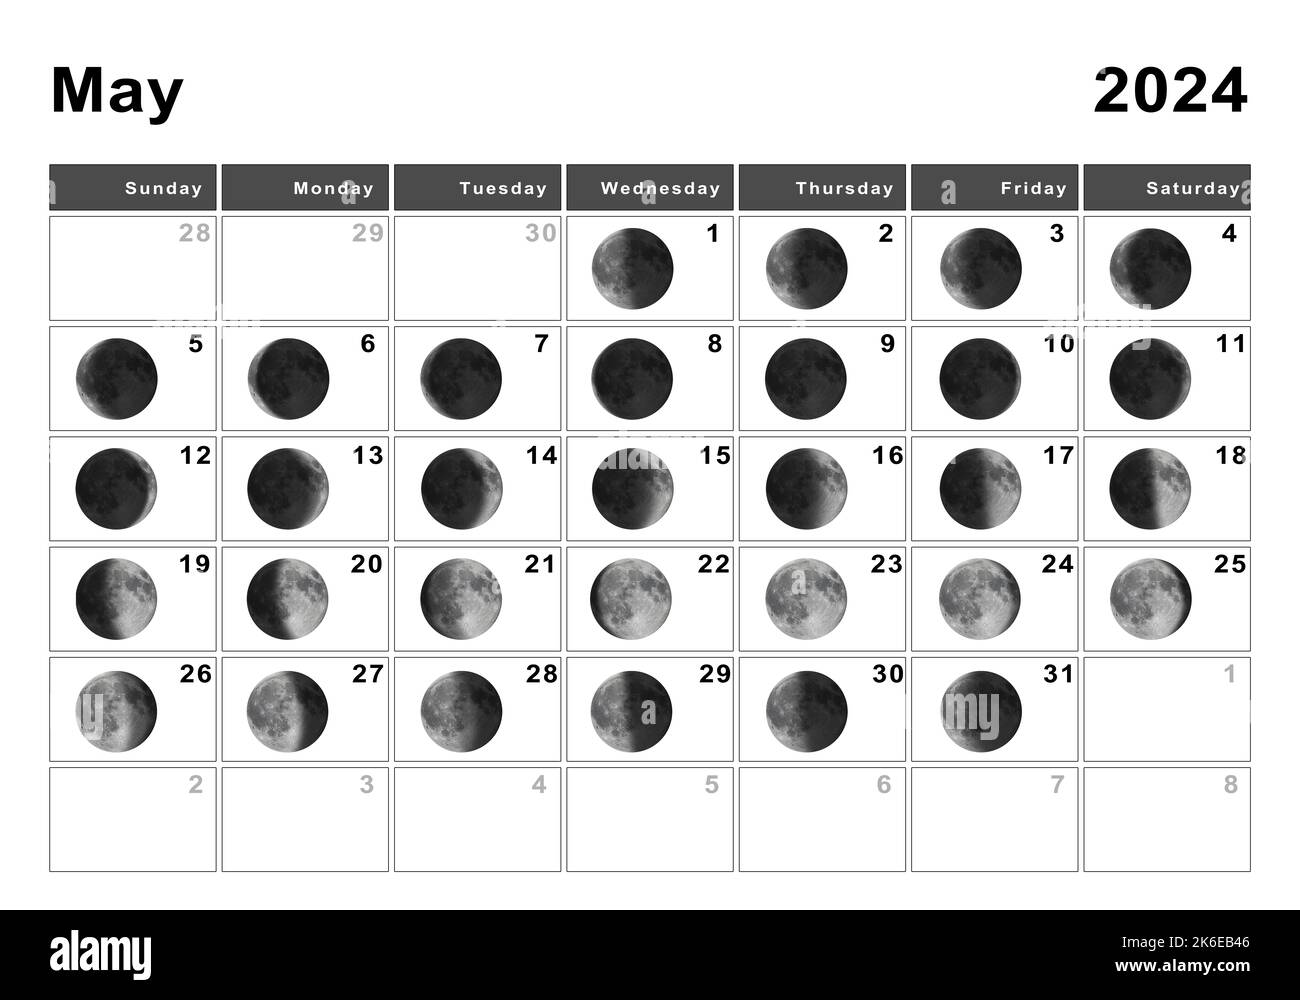 May 2024 Lunar calendar, Moon cycles, Moon Phases Stock Photo Alamy